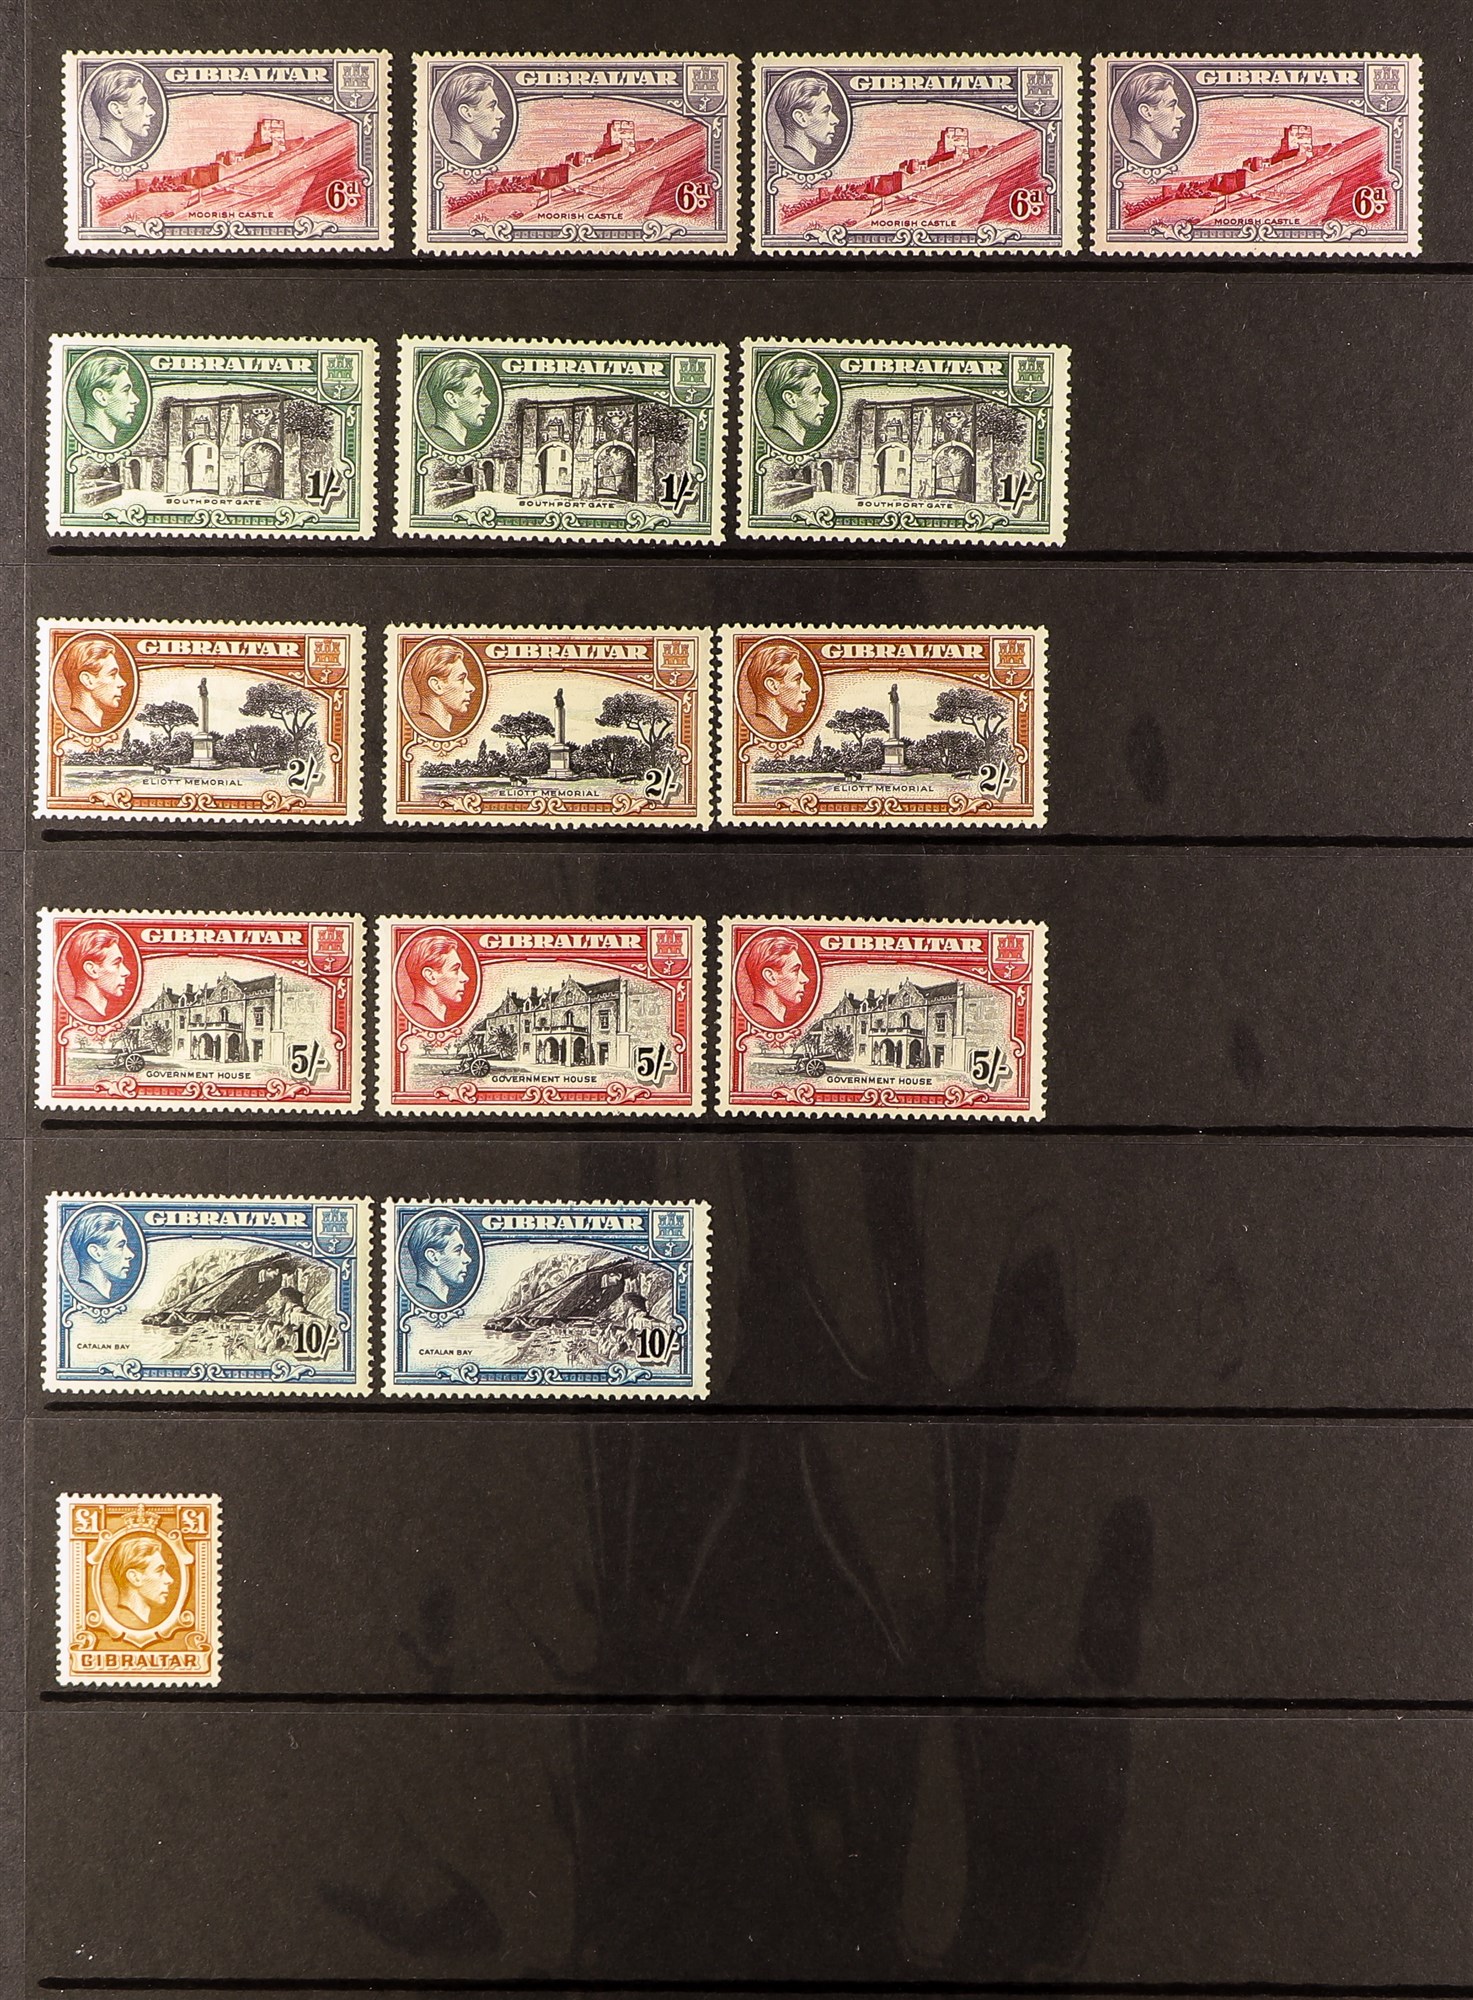 GIBRALTAR 1938-51 . fine mint collection with the basic set SG 121/131, plus most of the - Image 2 of 2